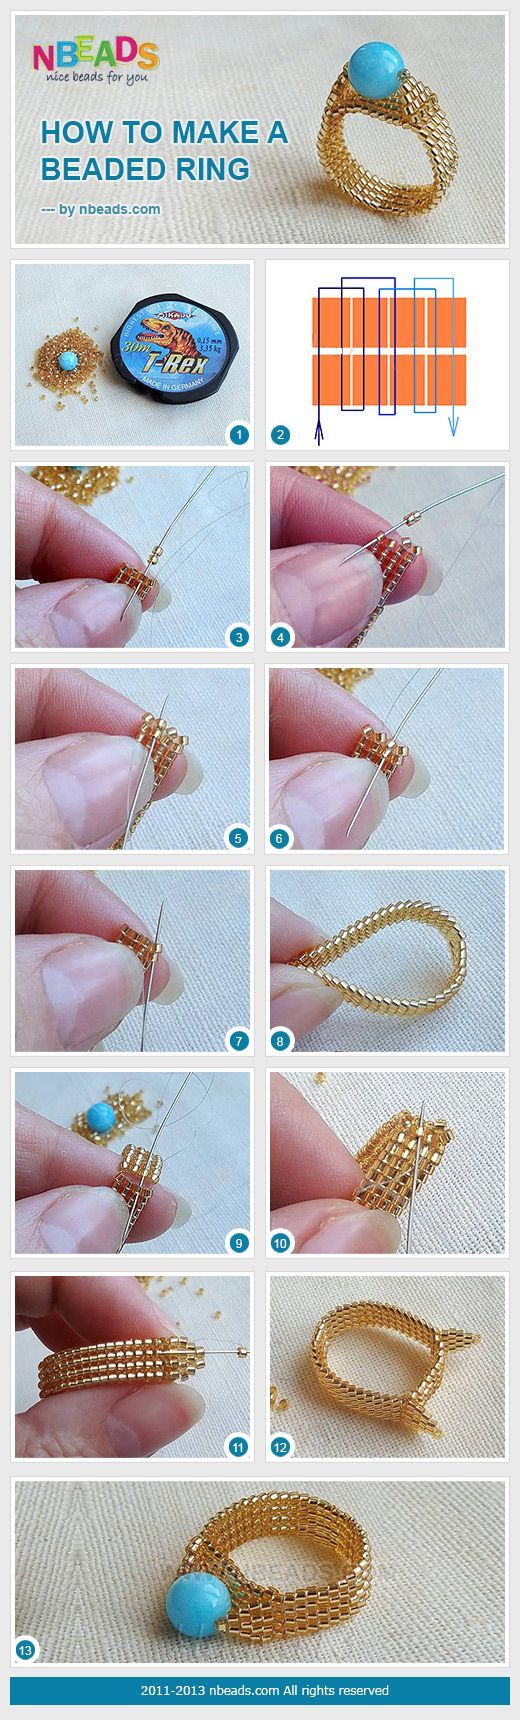 how to make a beaded ring.